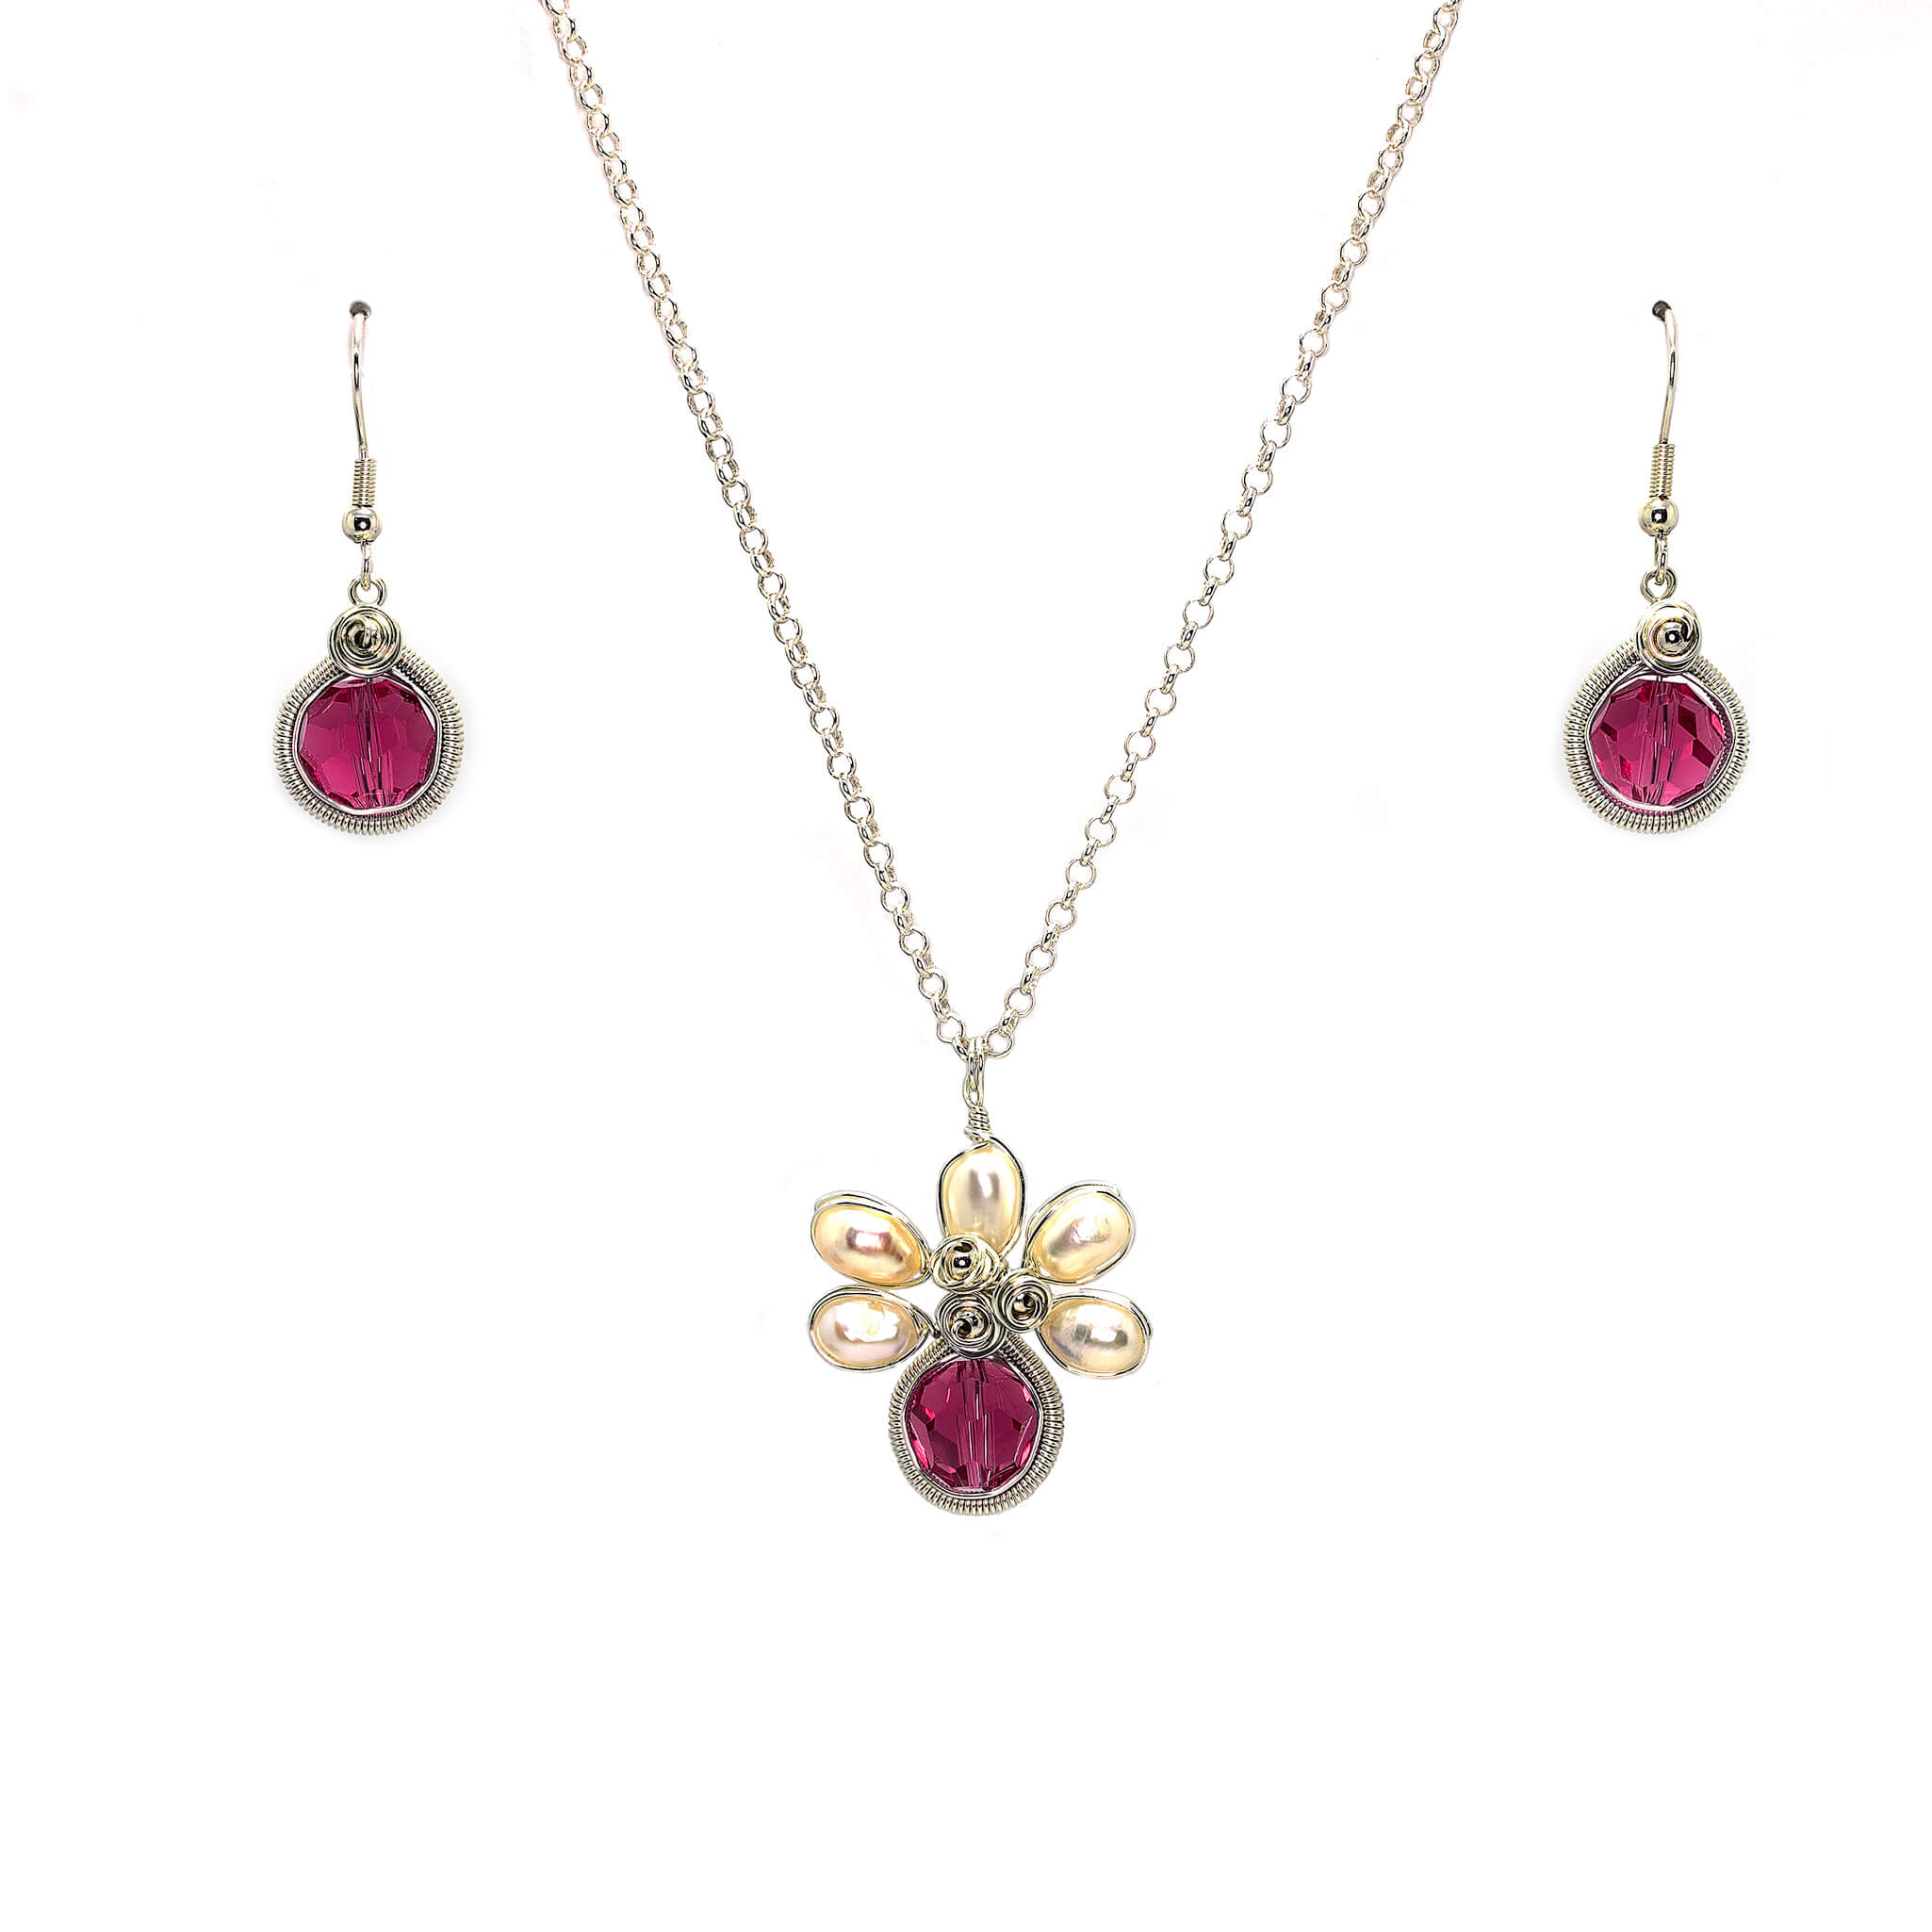 Buy Matching Pink Costume Jewelry Gift Set|Necklace Earrings Ring Sets